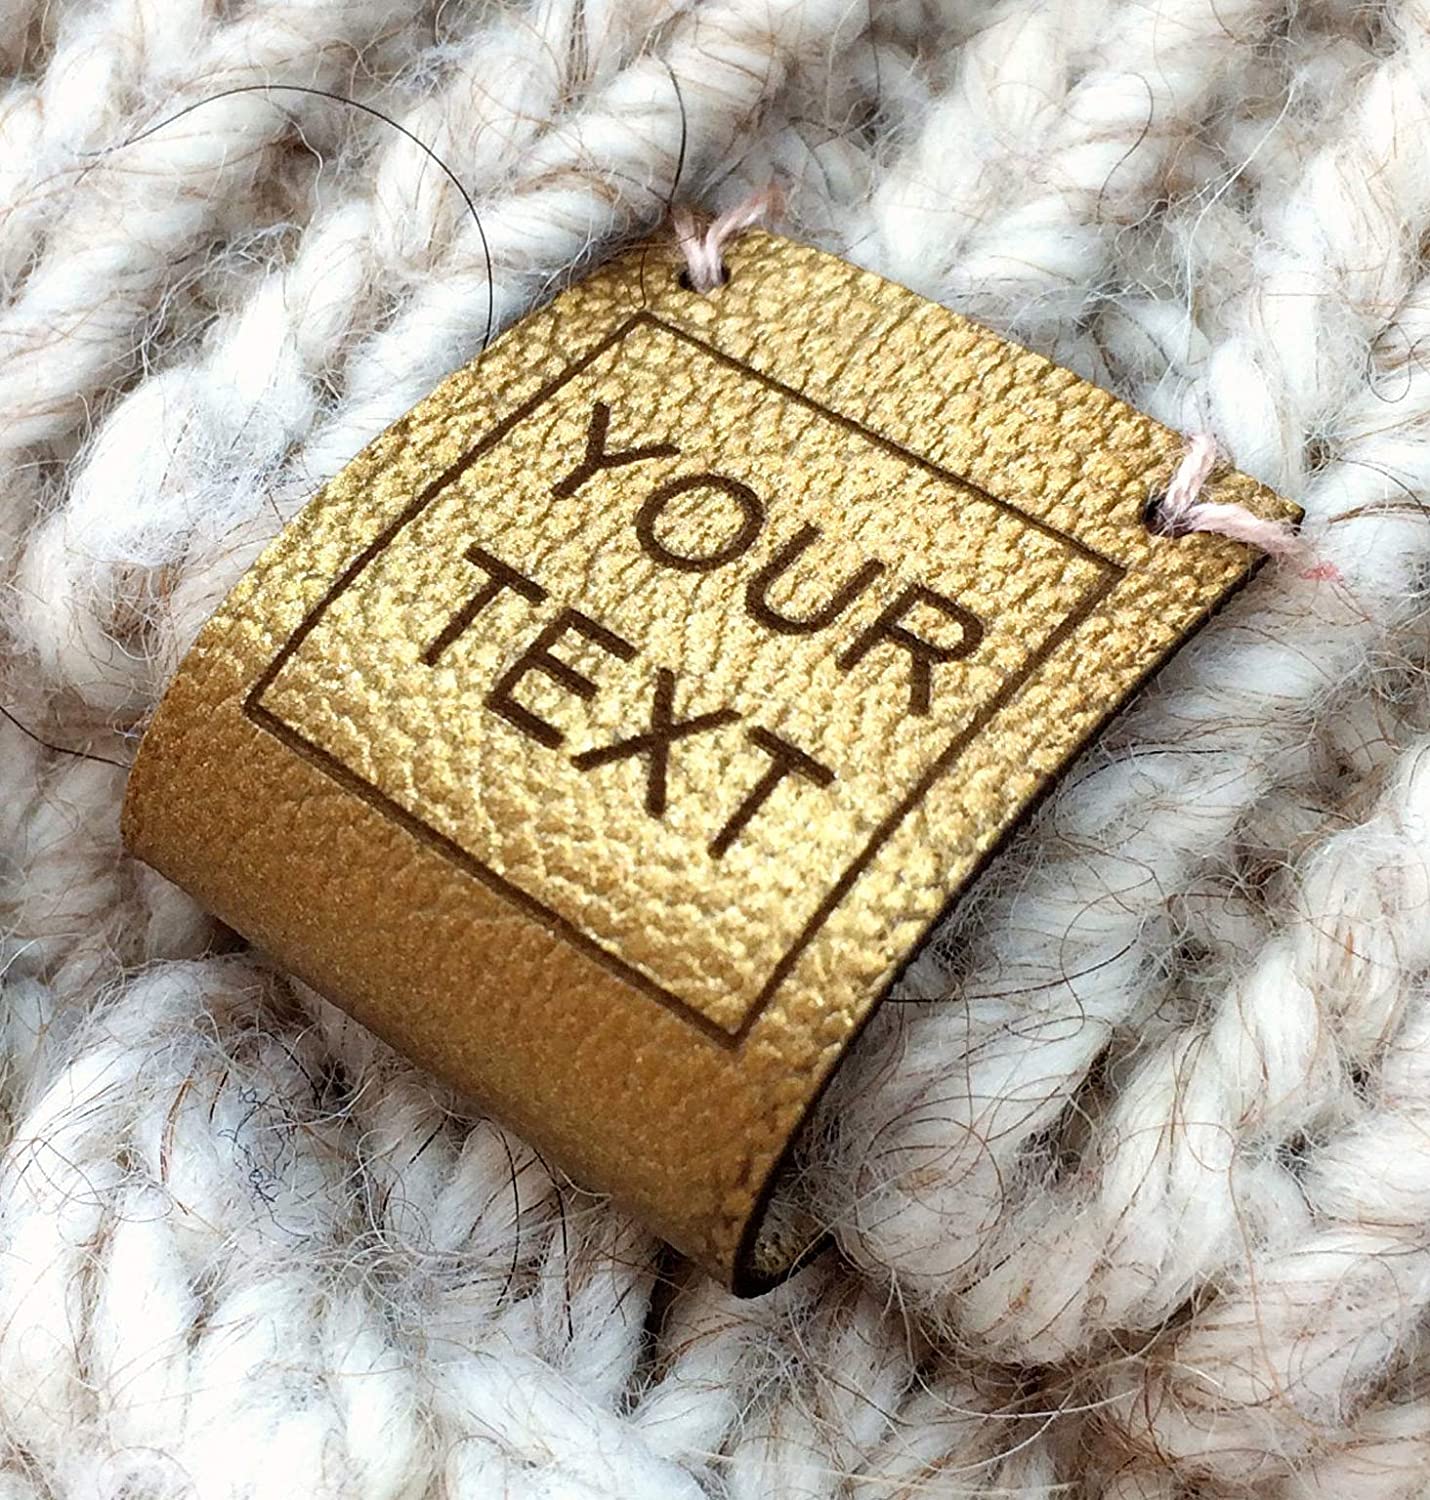  labels for knitting, labels for crochet, leather labels for  handmade items, personalized labels, custom clothing labels : Handmade  Products